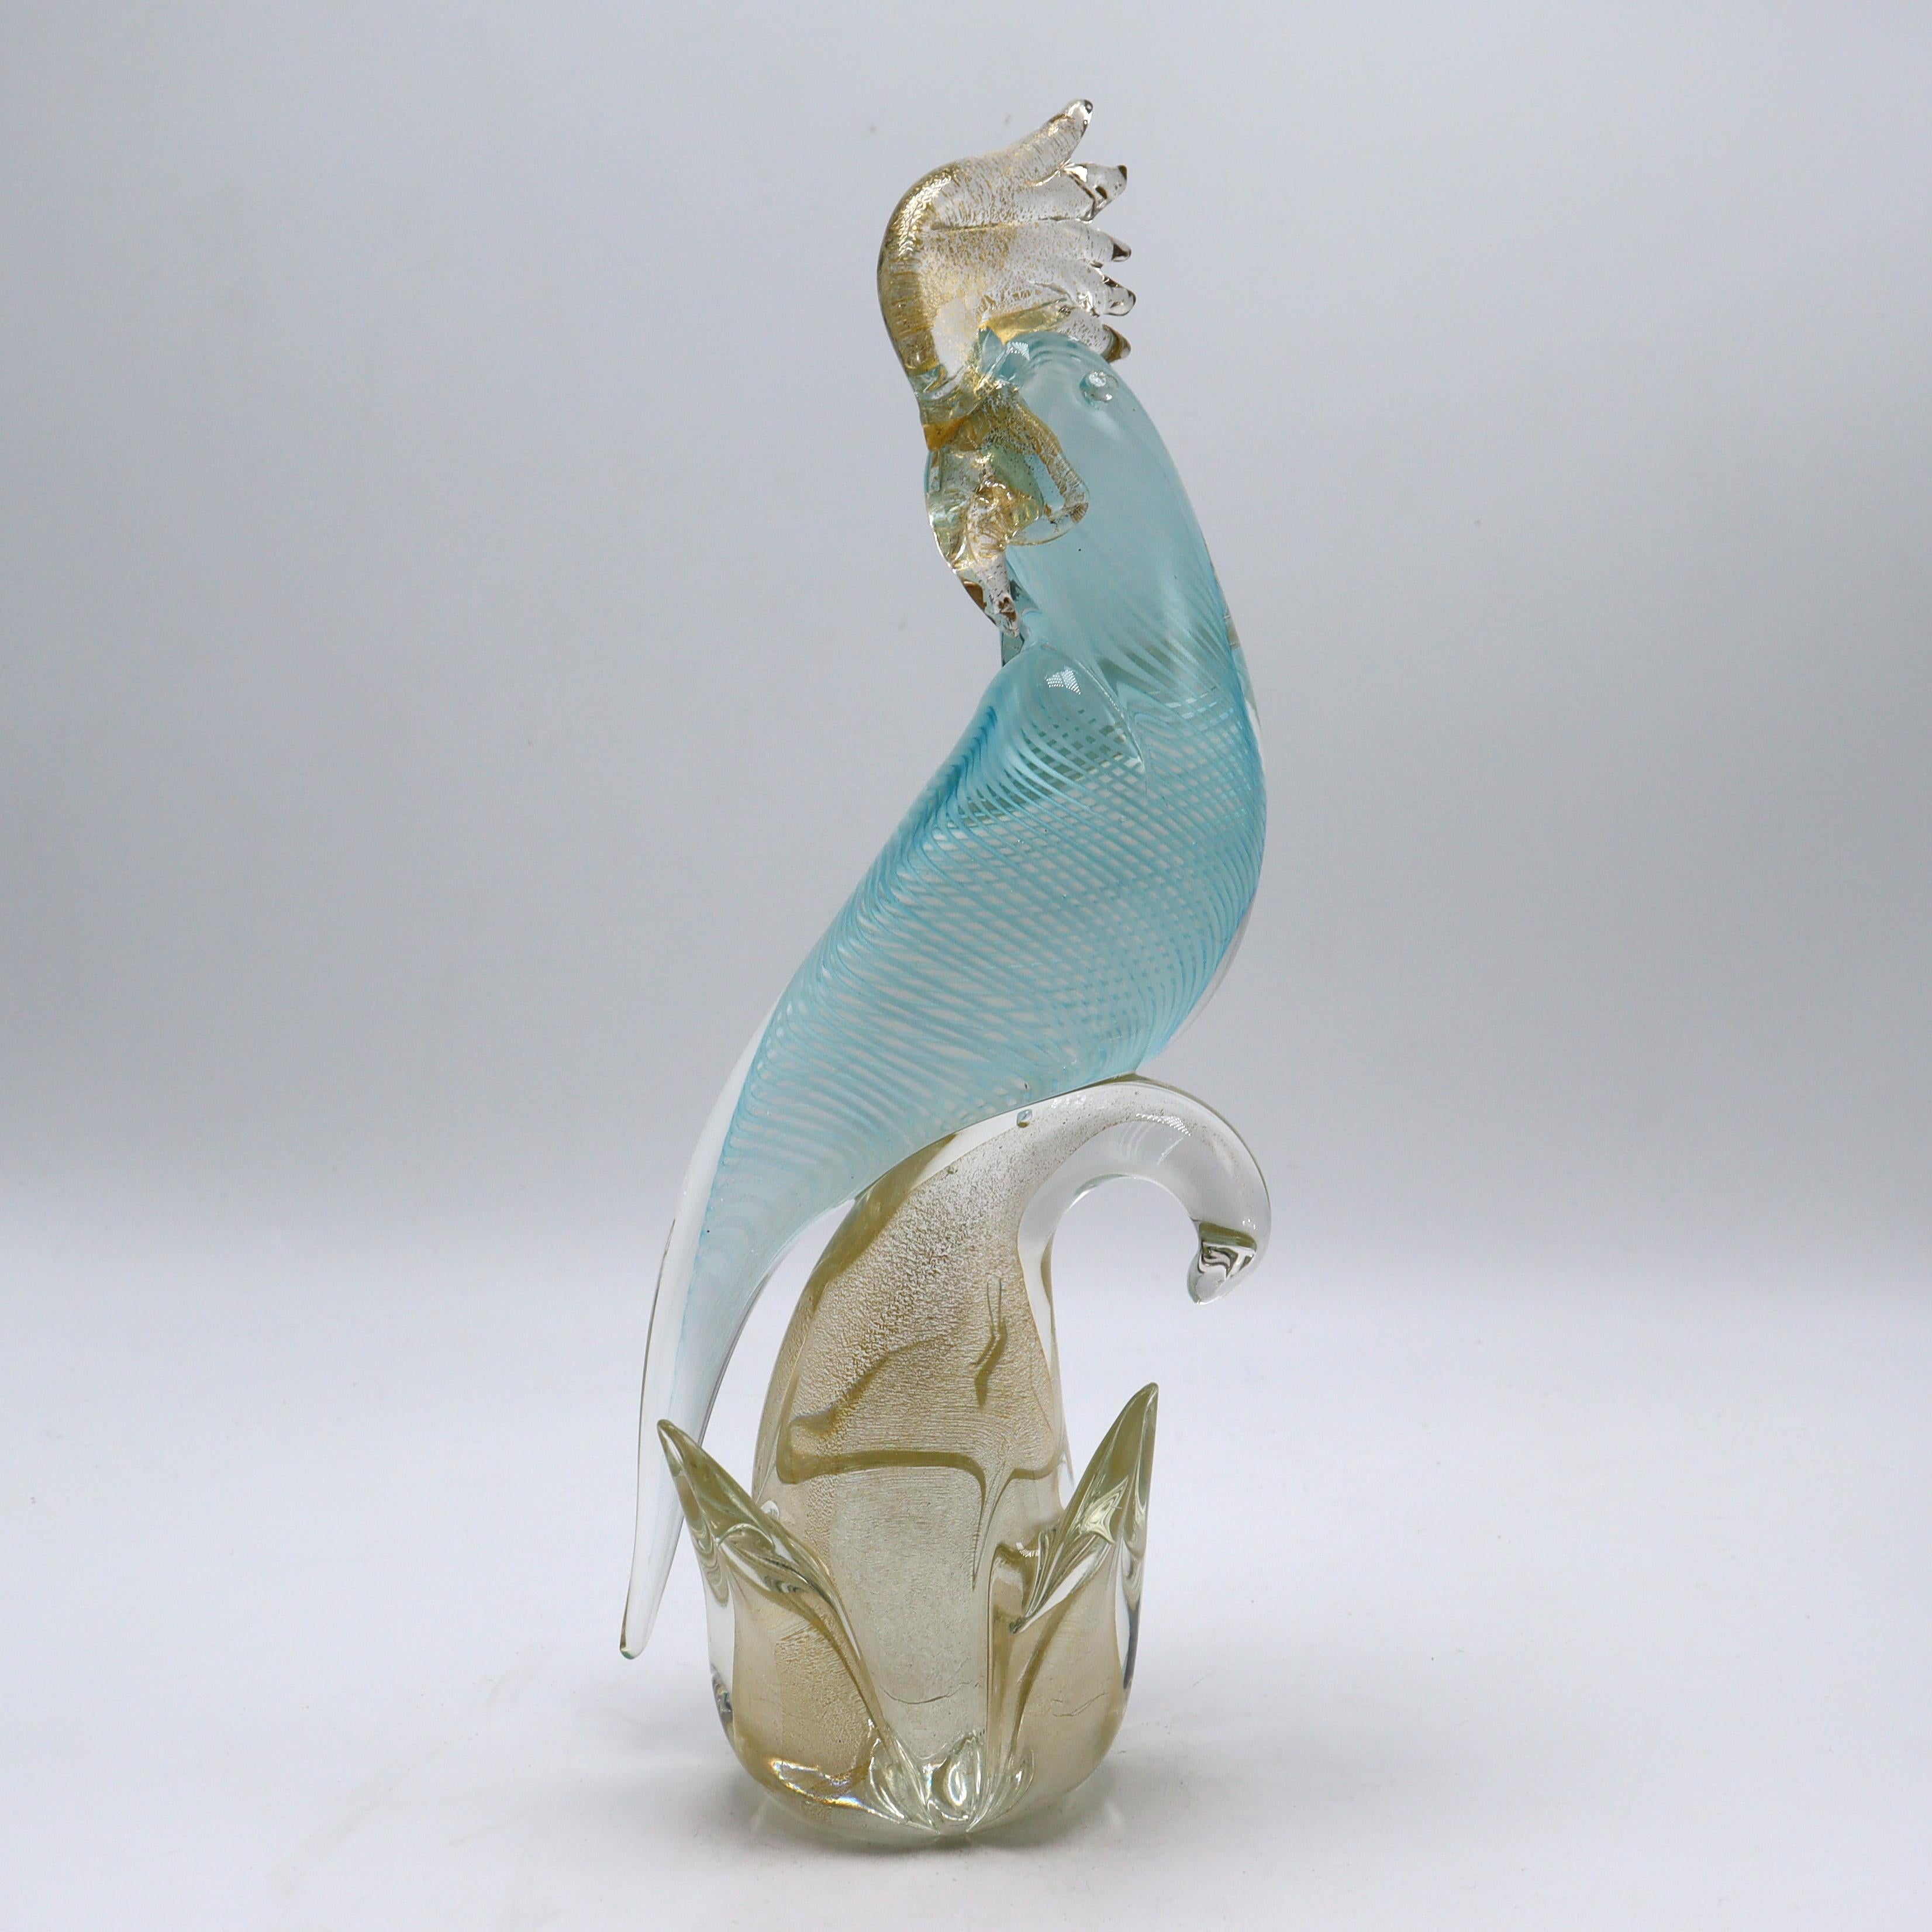 Blue and Gold Murano signed Sandro Frattin parrot, c. 1950.